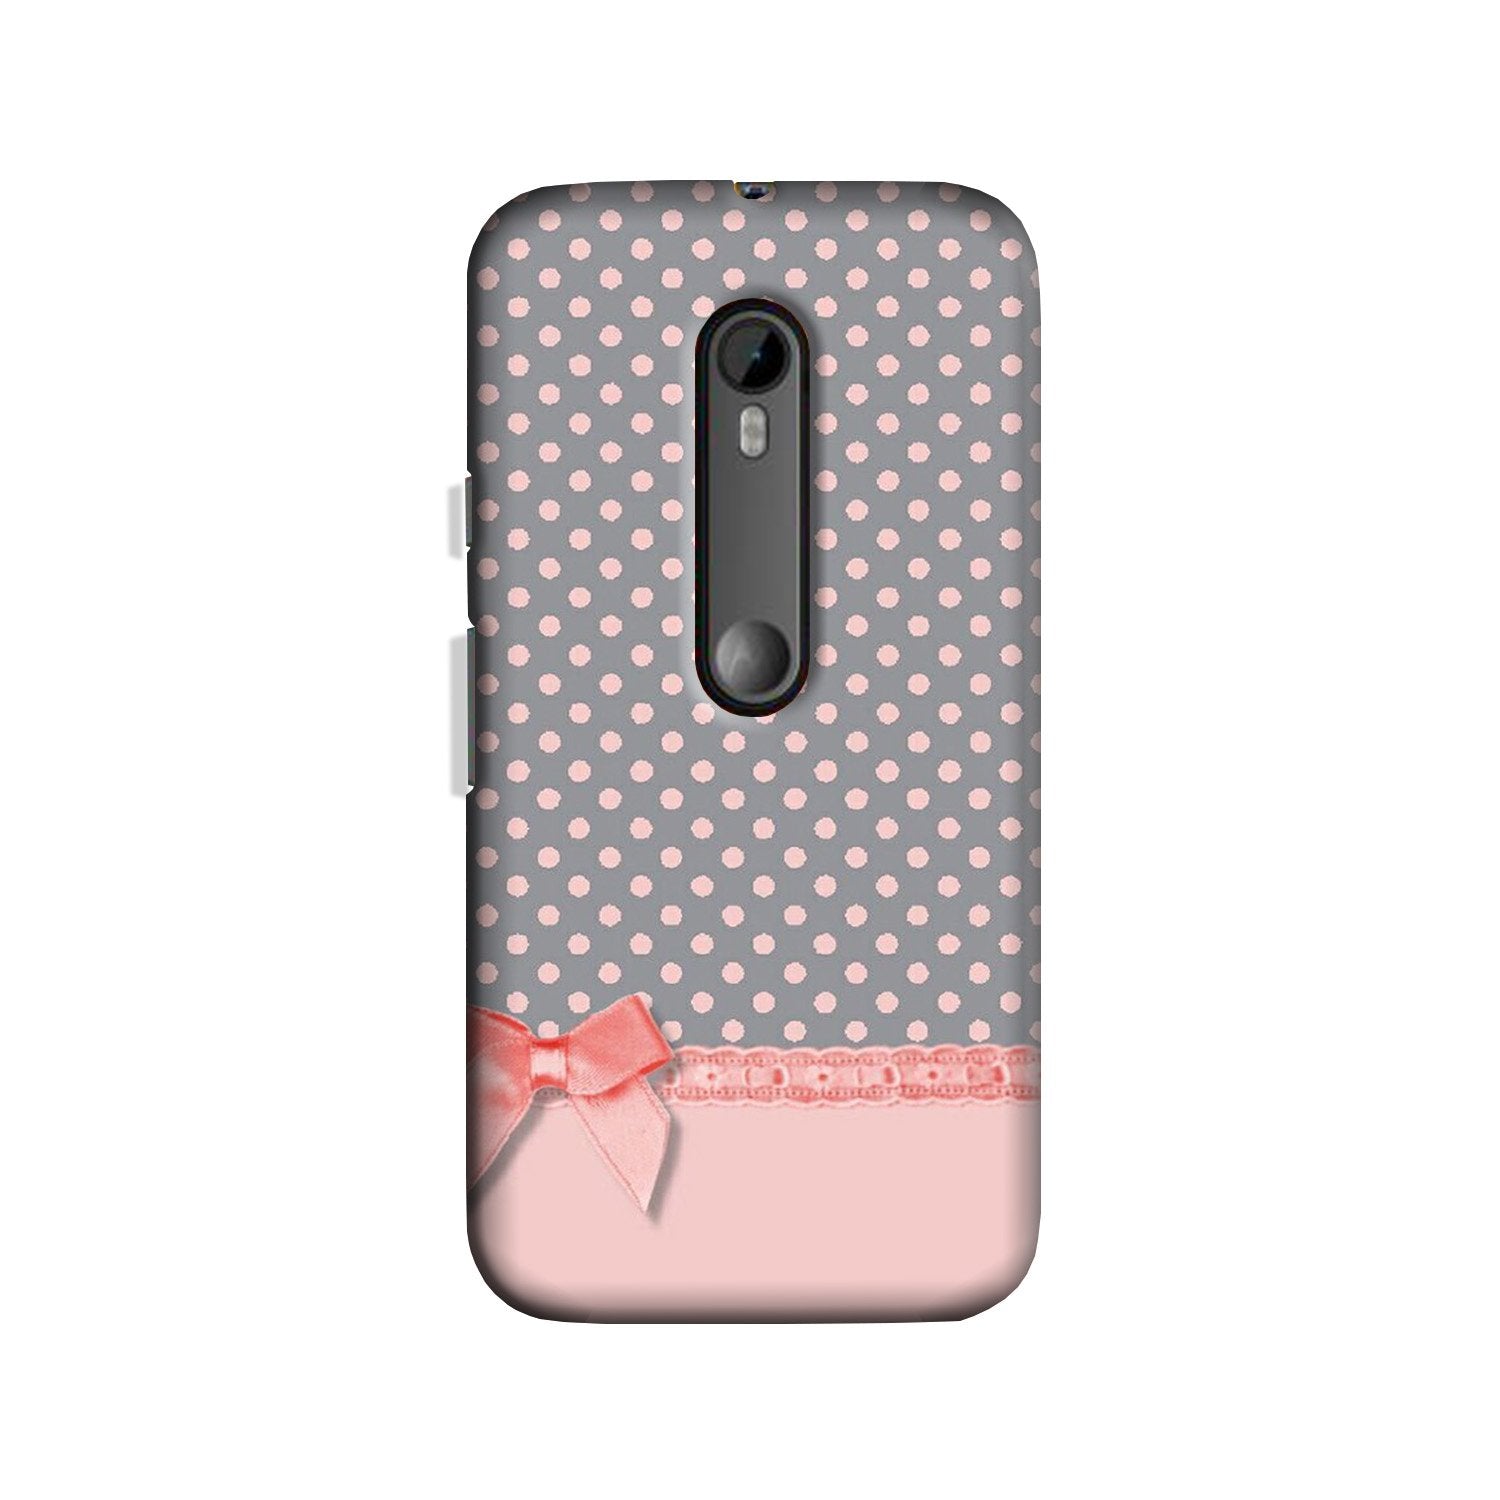 Gift Wrap2 Case for Moto X Force